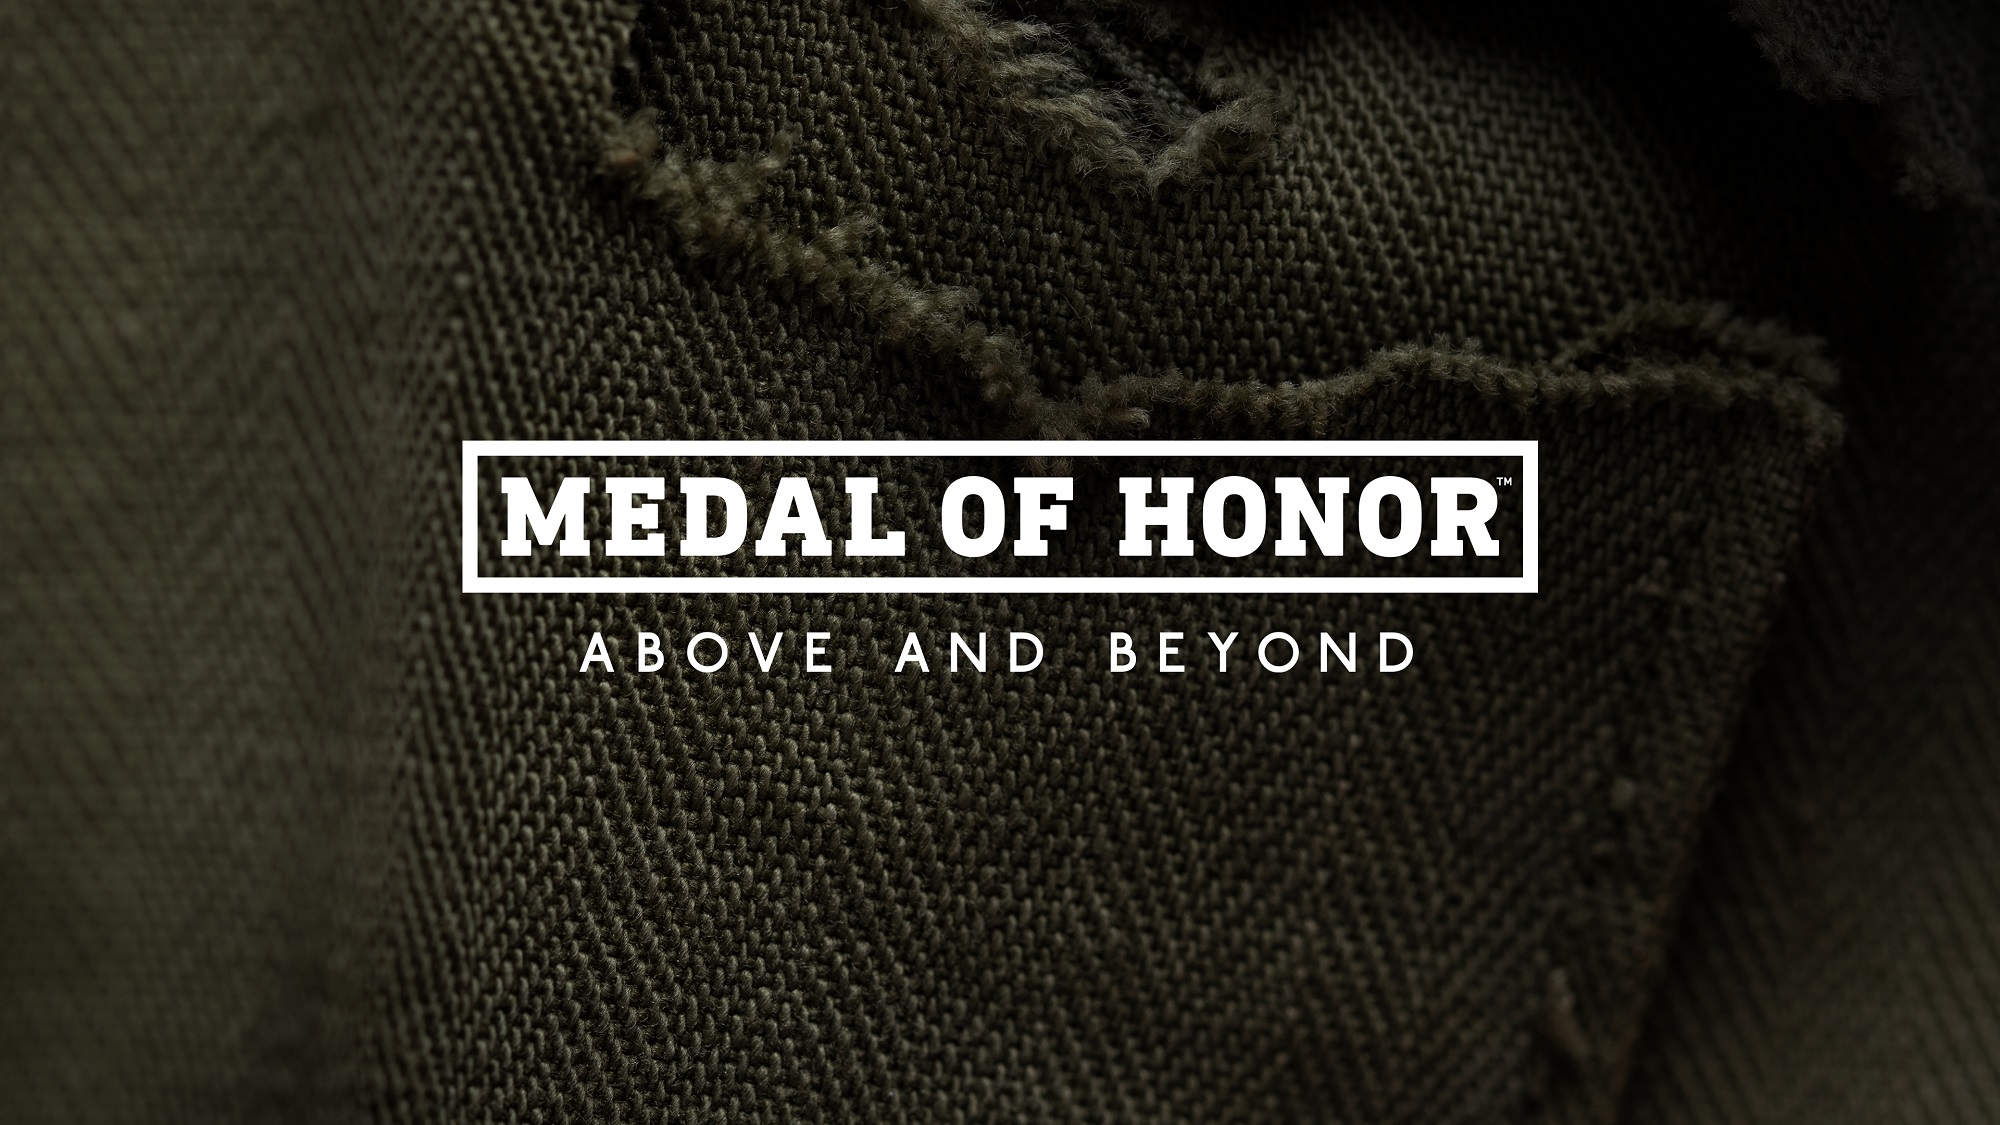 medal of honor vr above and beyond logo asset